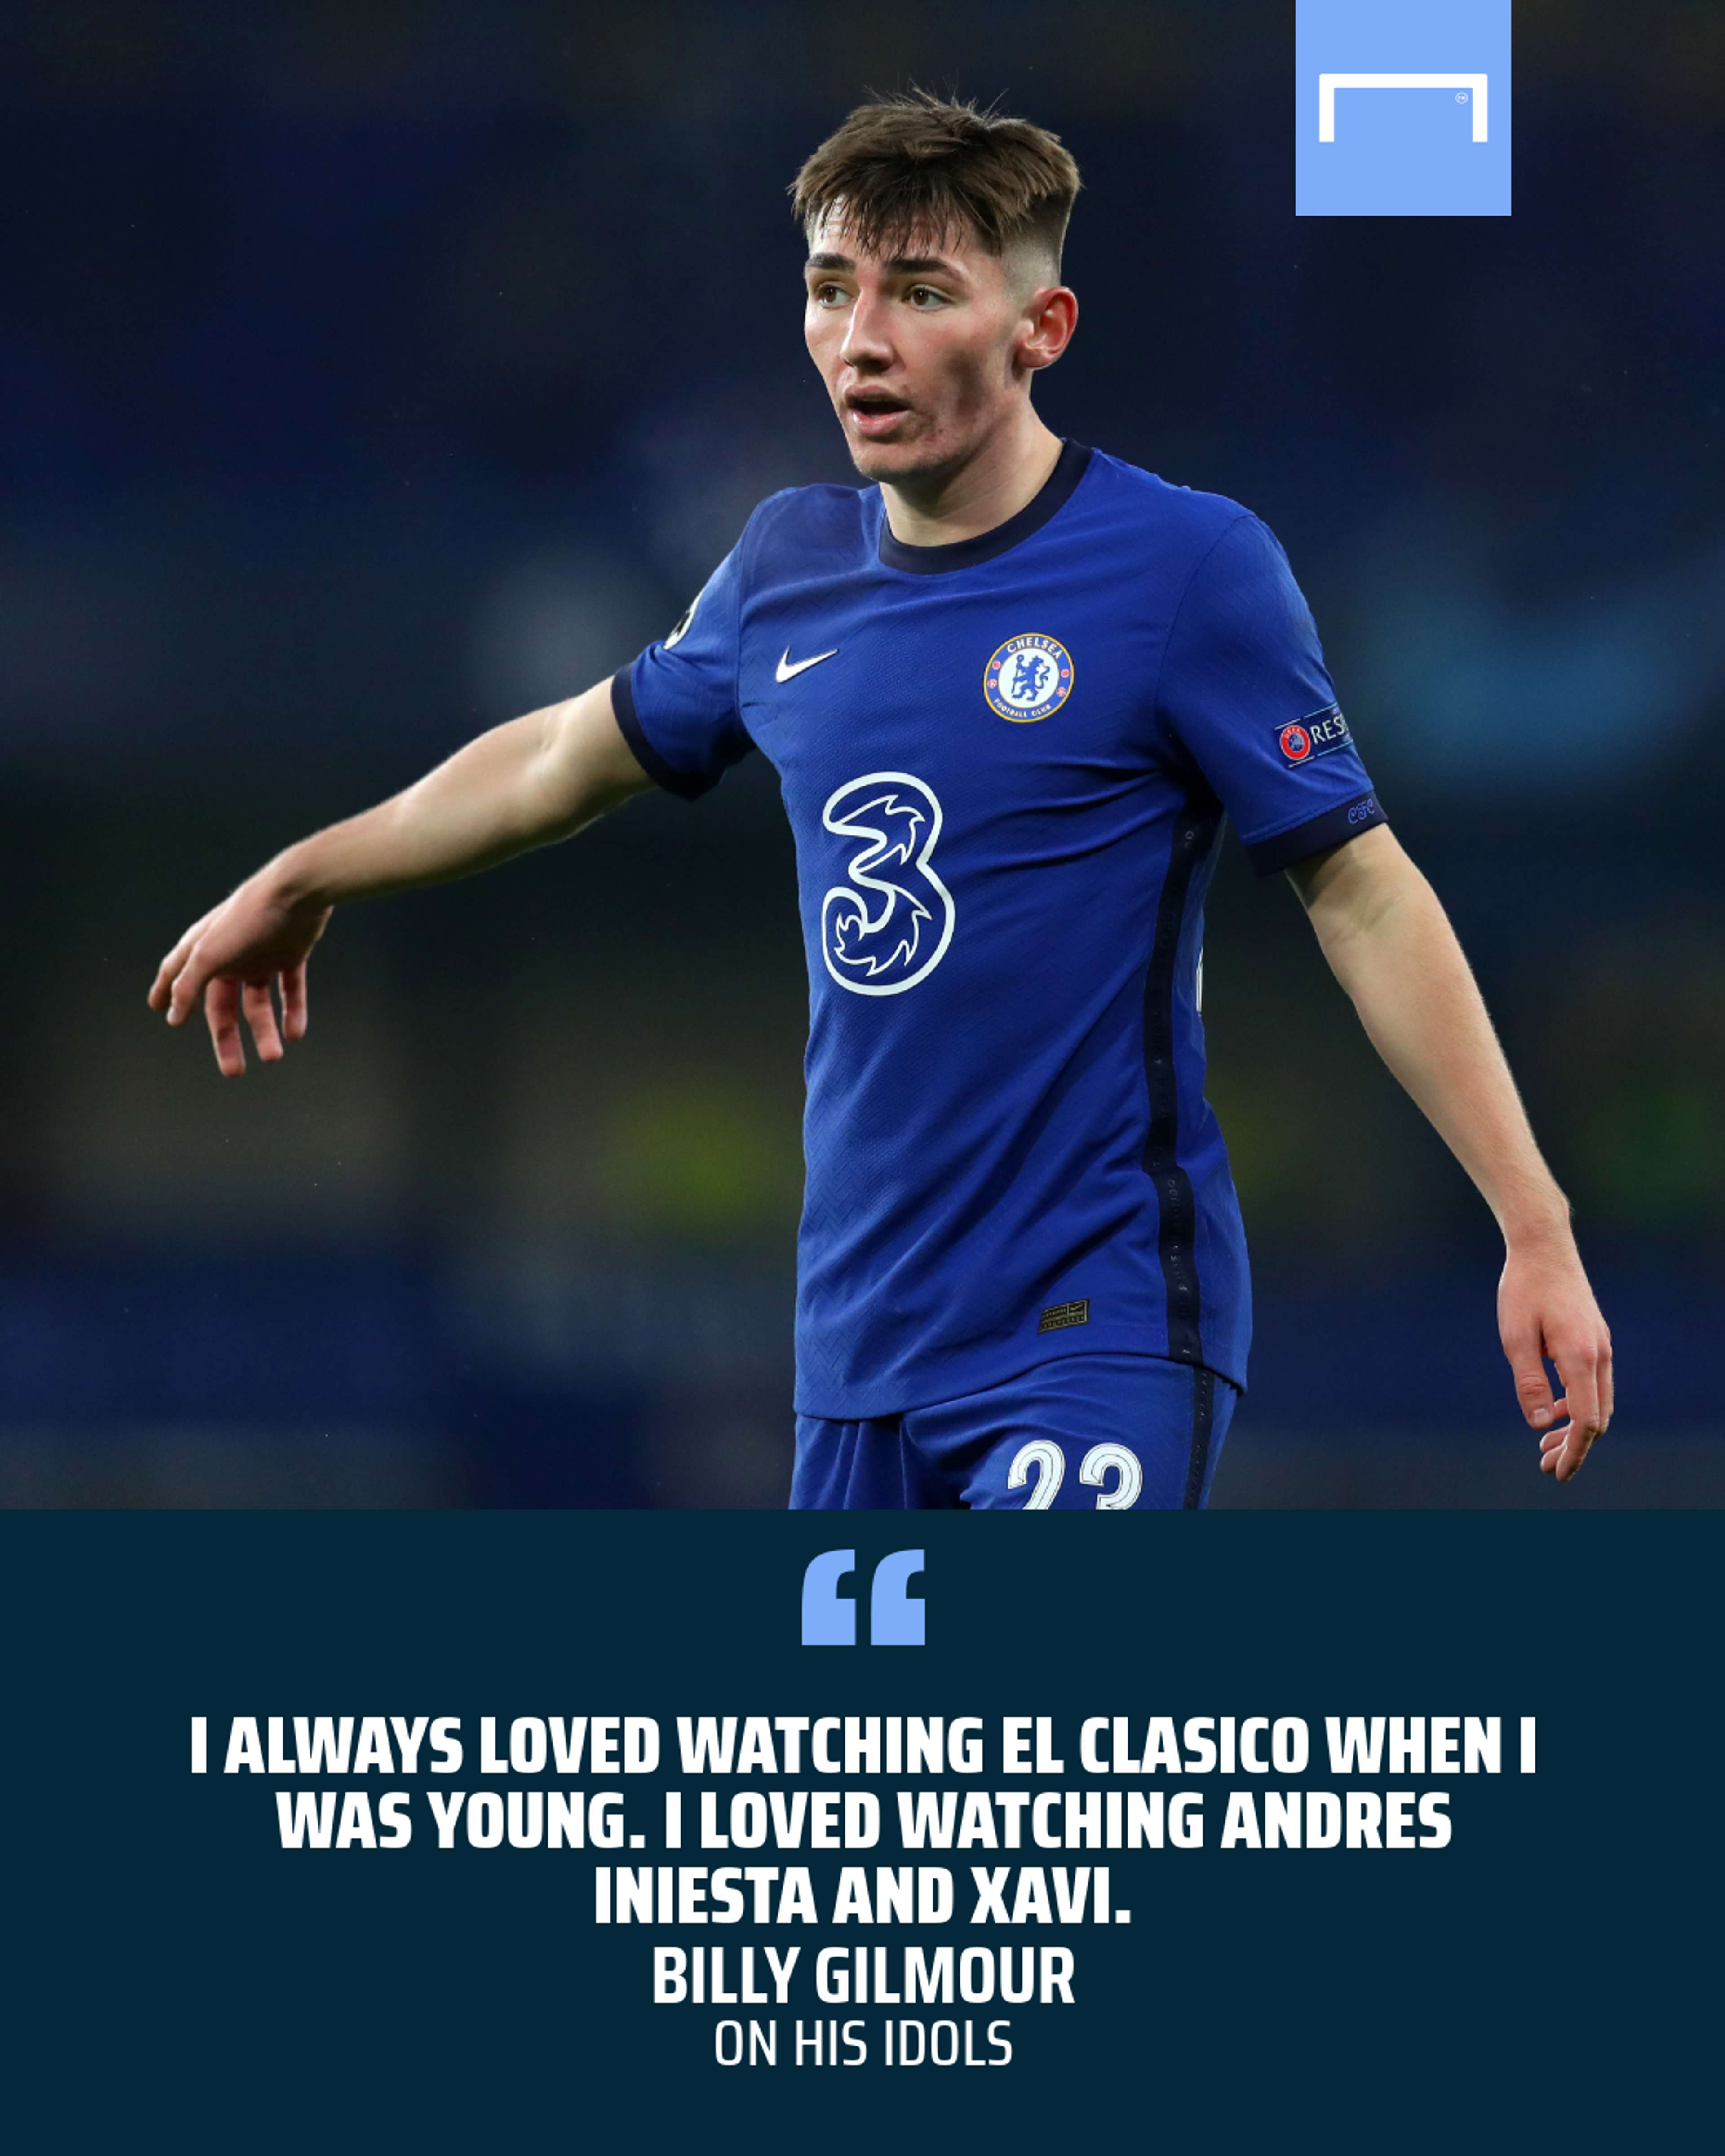 Billy Gilmour quote GFX